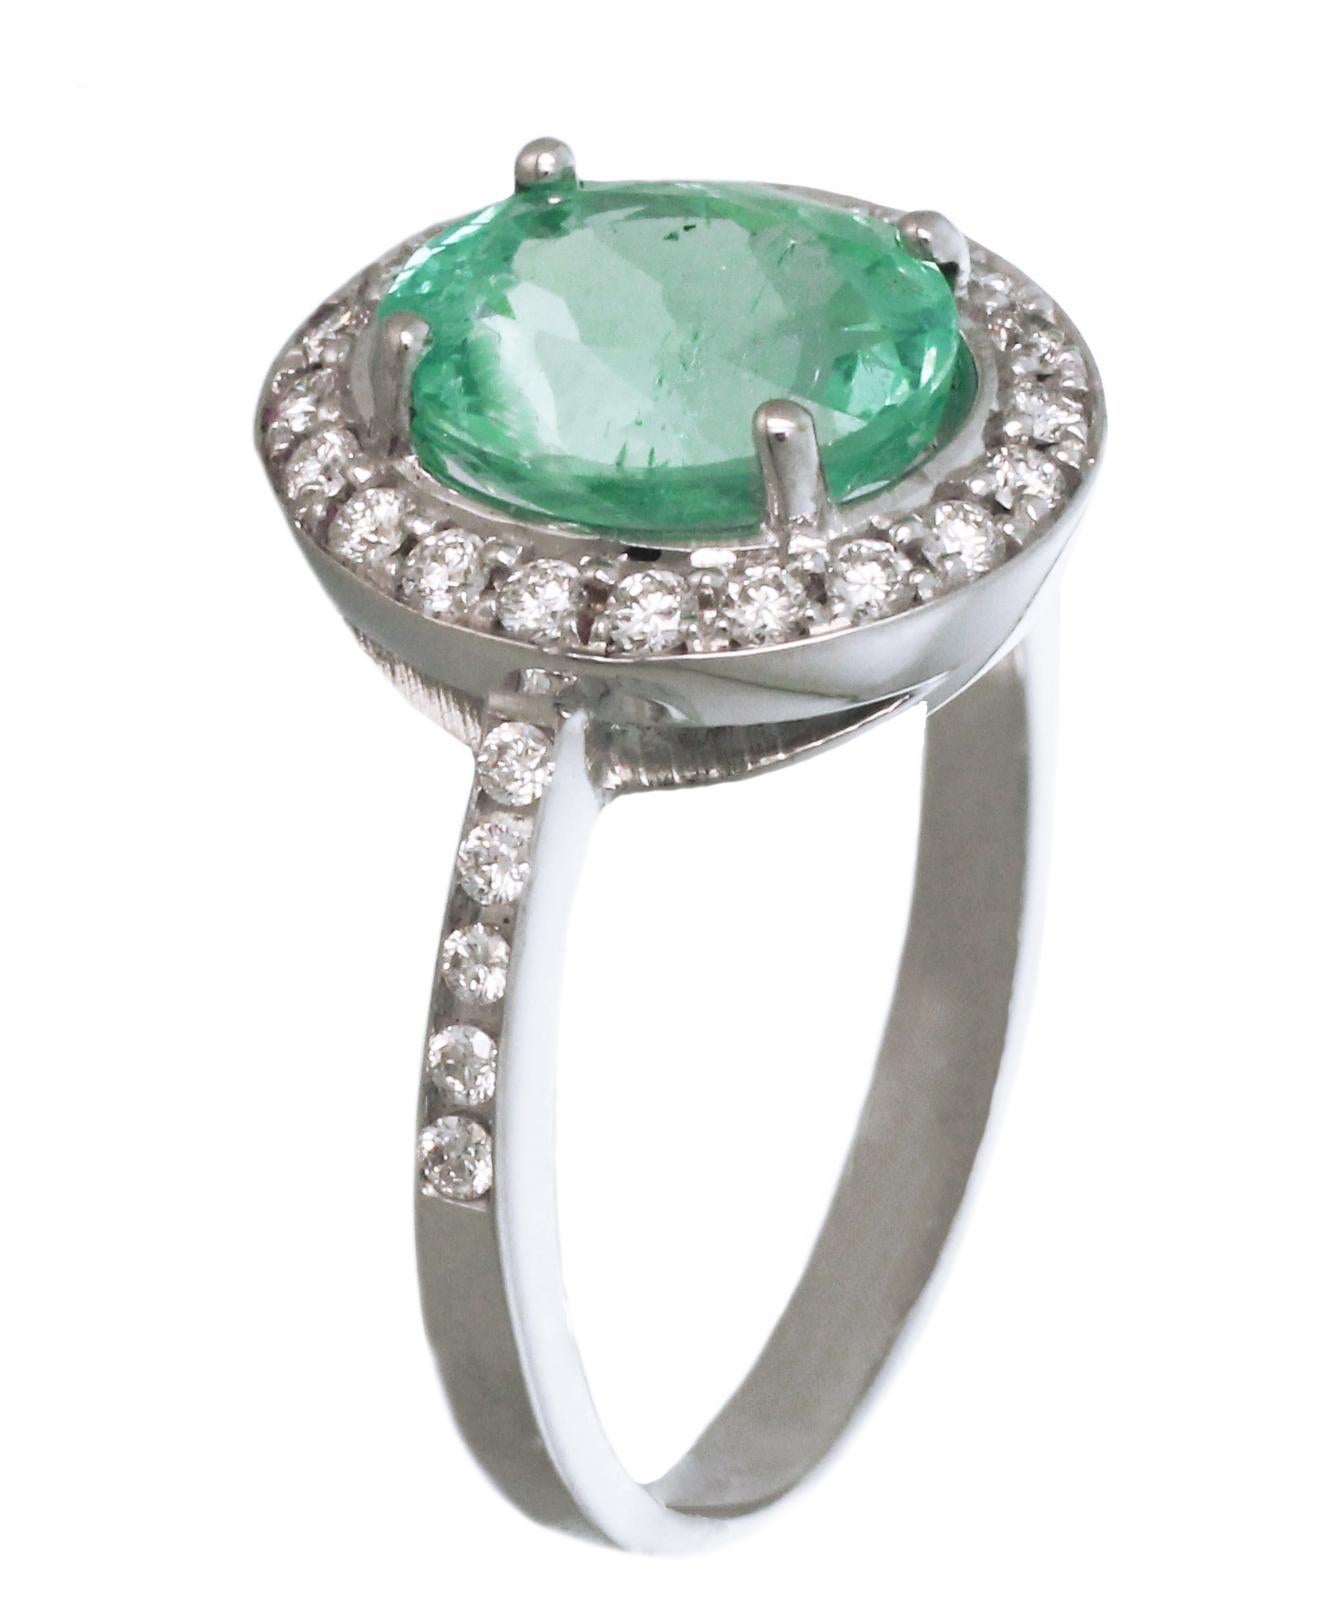 18K White Gold, Diamonds and 2,56 Carat Emerald Ring.
This Ring is made in 18K White Gold, Emerald and Diamonds ( see below technical features). 
The emerald is a very clean Colombian emerald, high quality emerald. 

Technical features: 
- Diamonds: